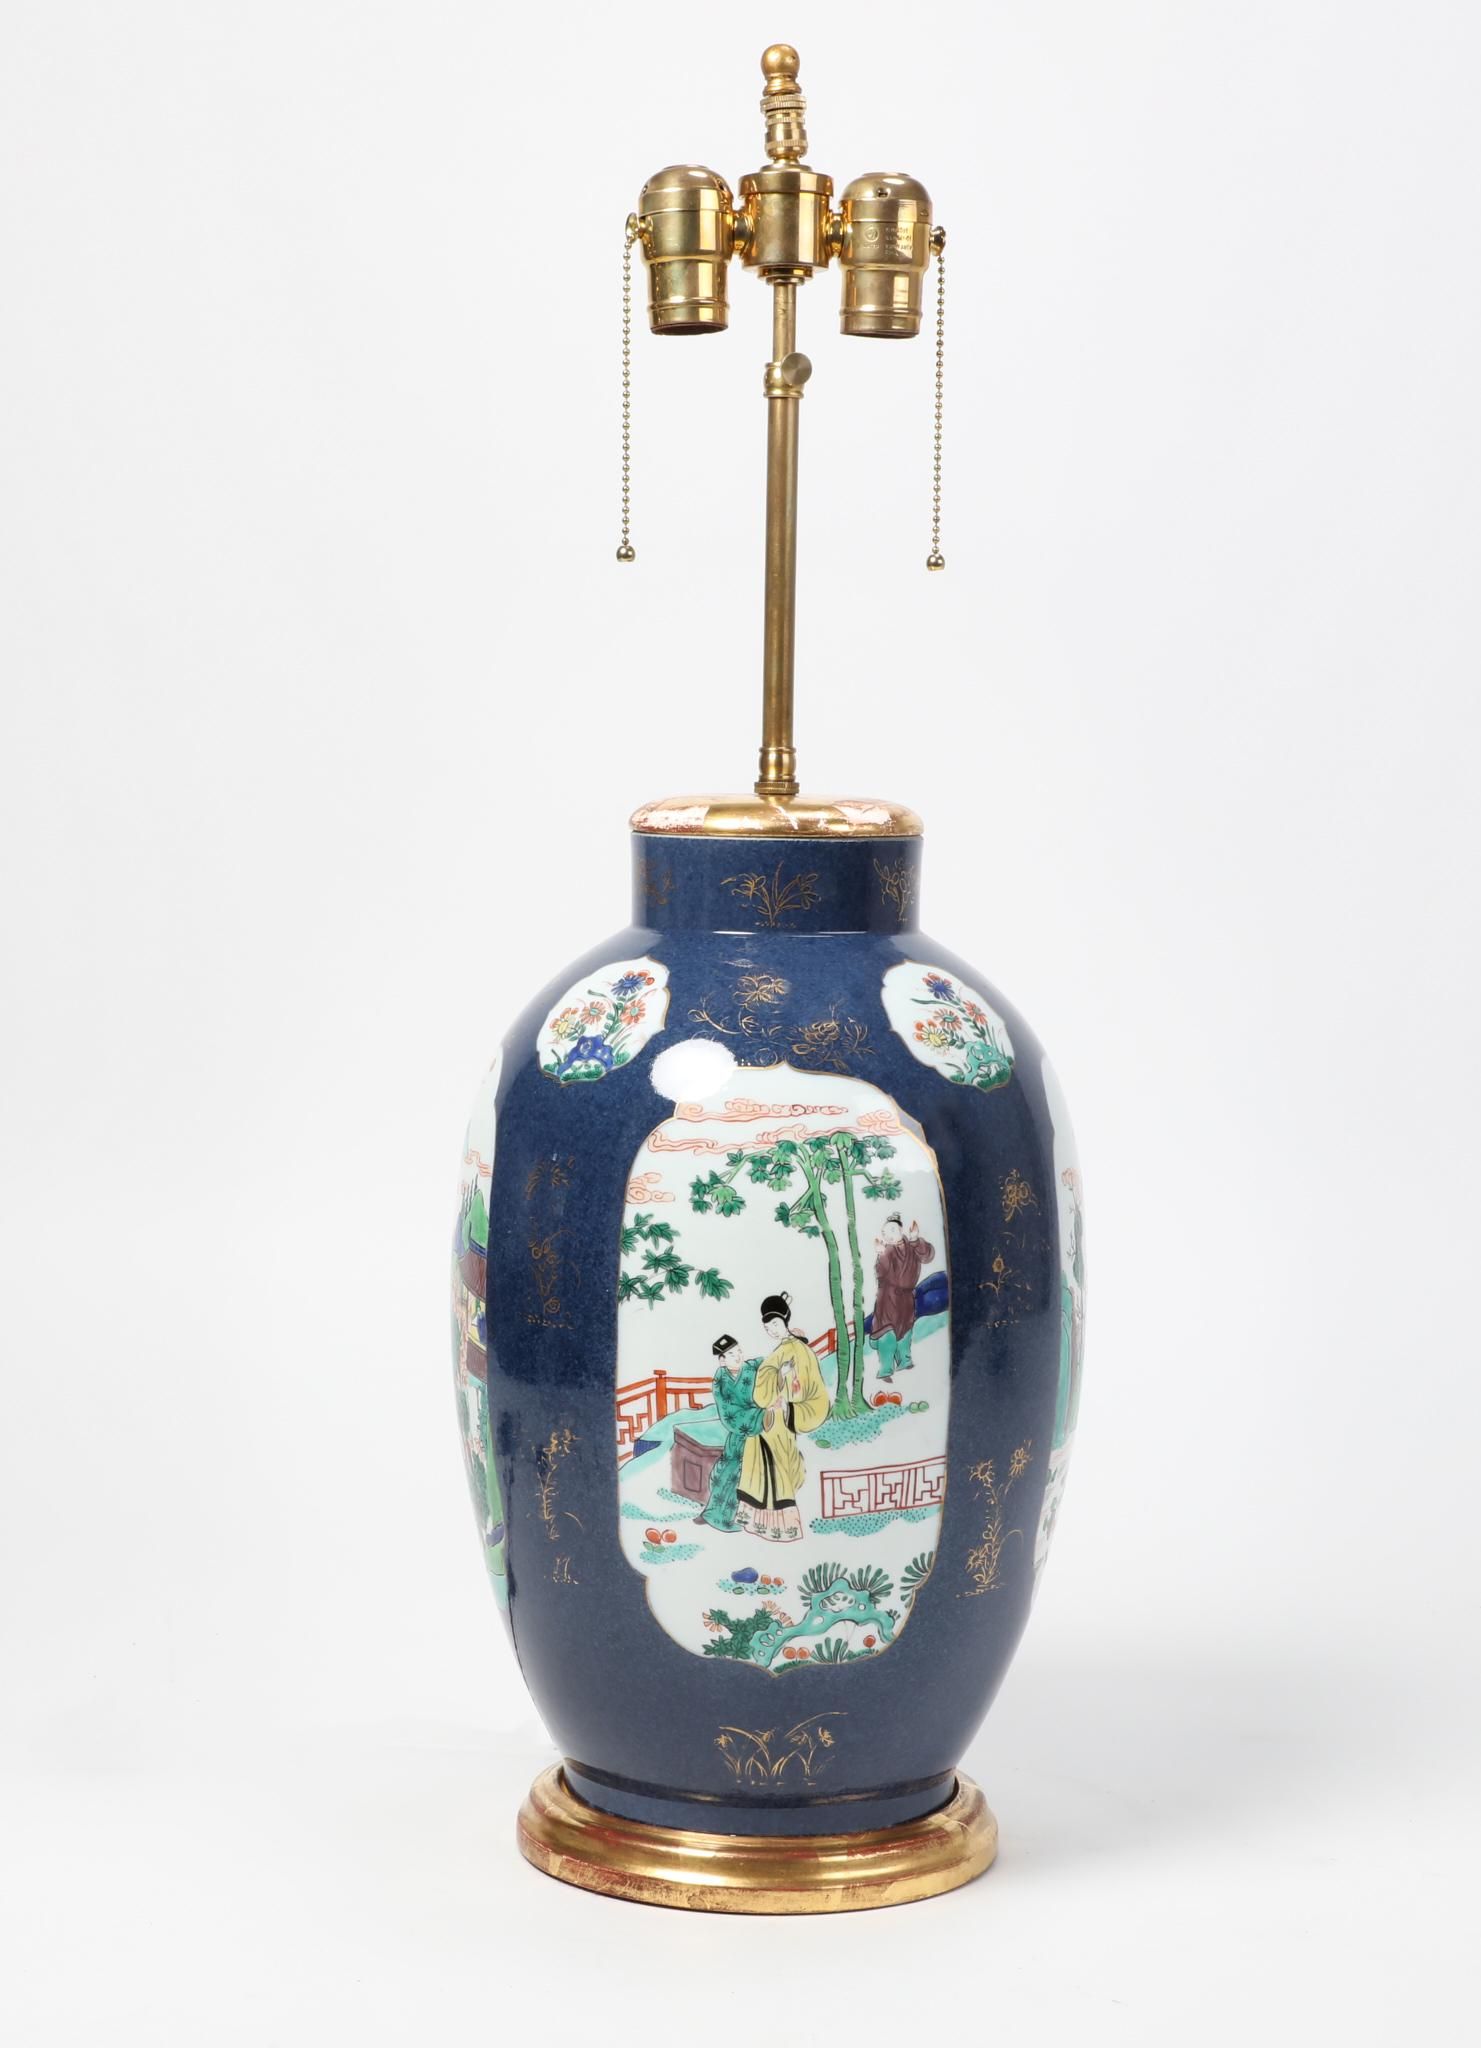 A CHINESE POLYCHROME ENAMELED PORCELAIN